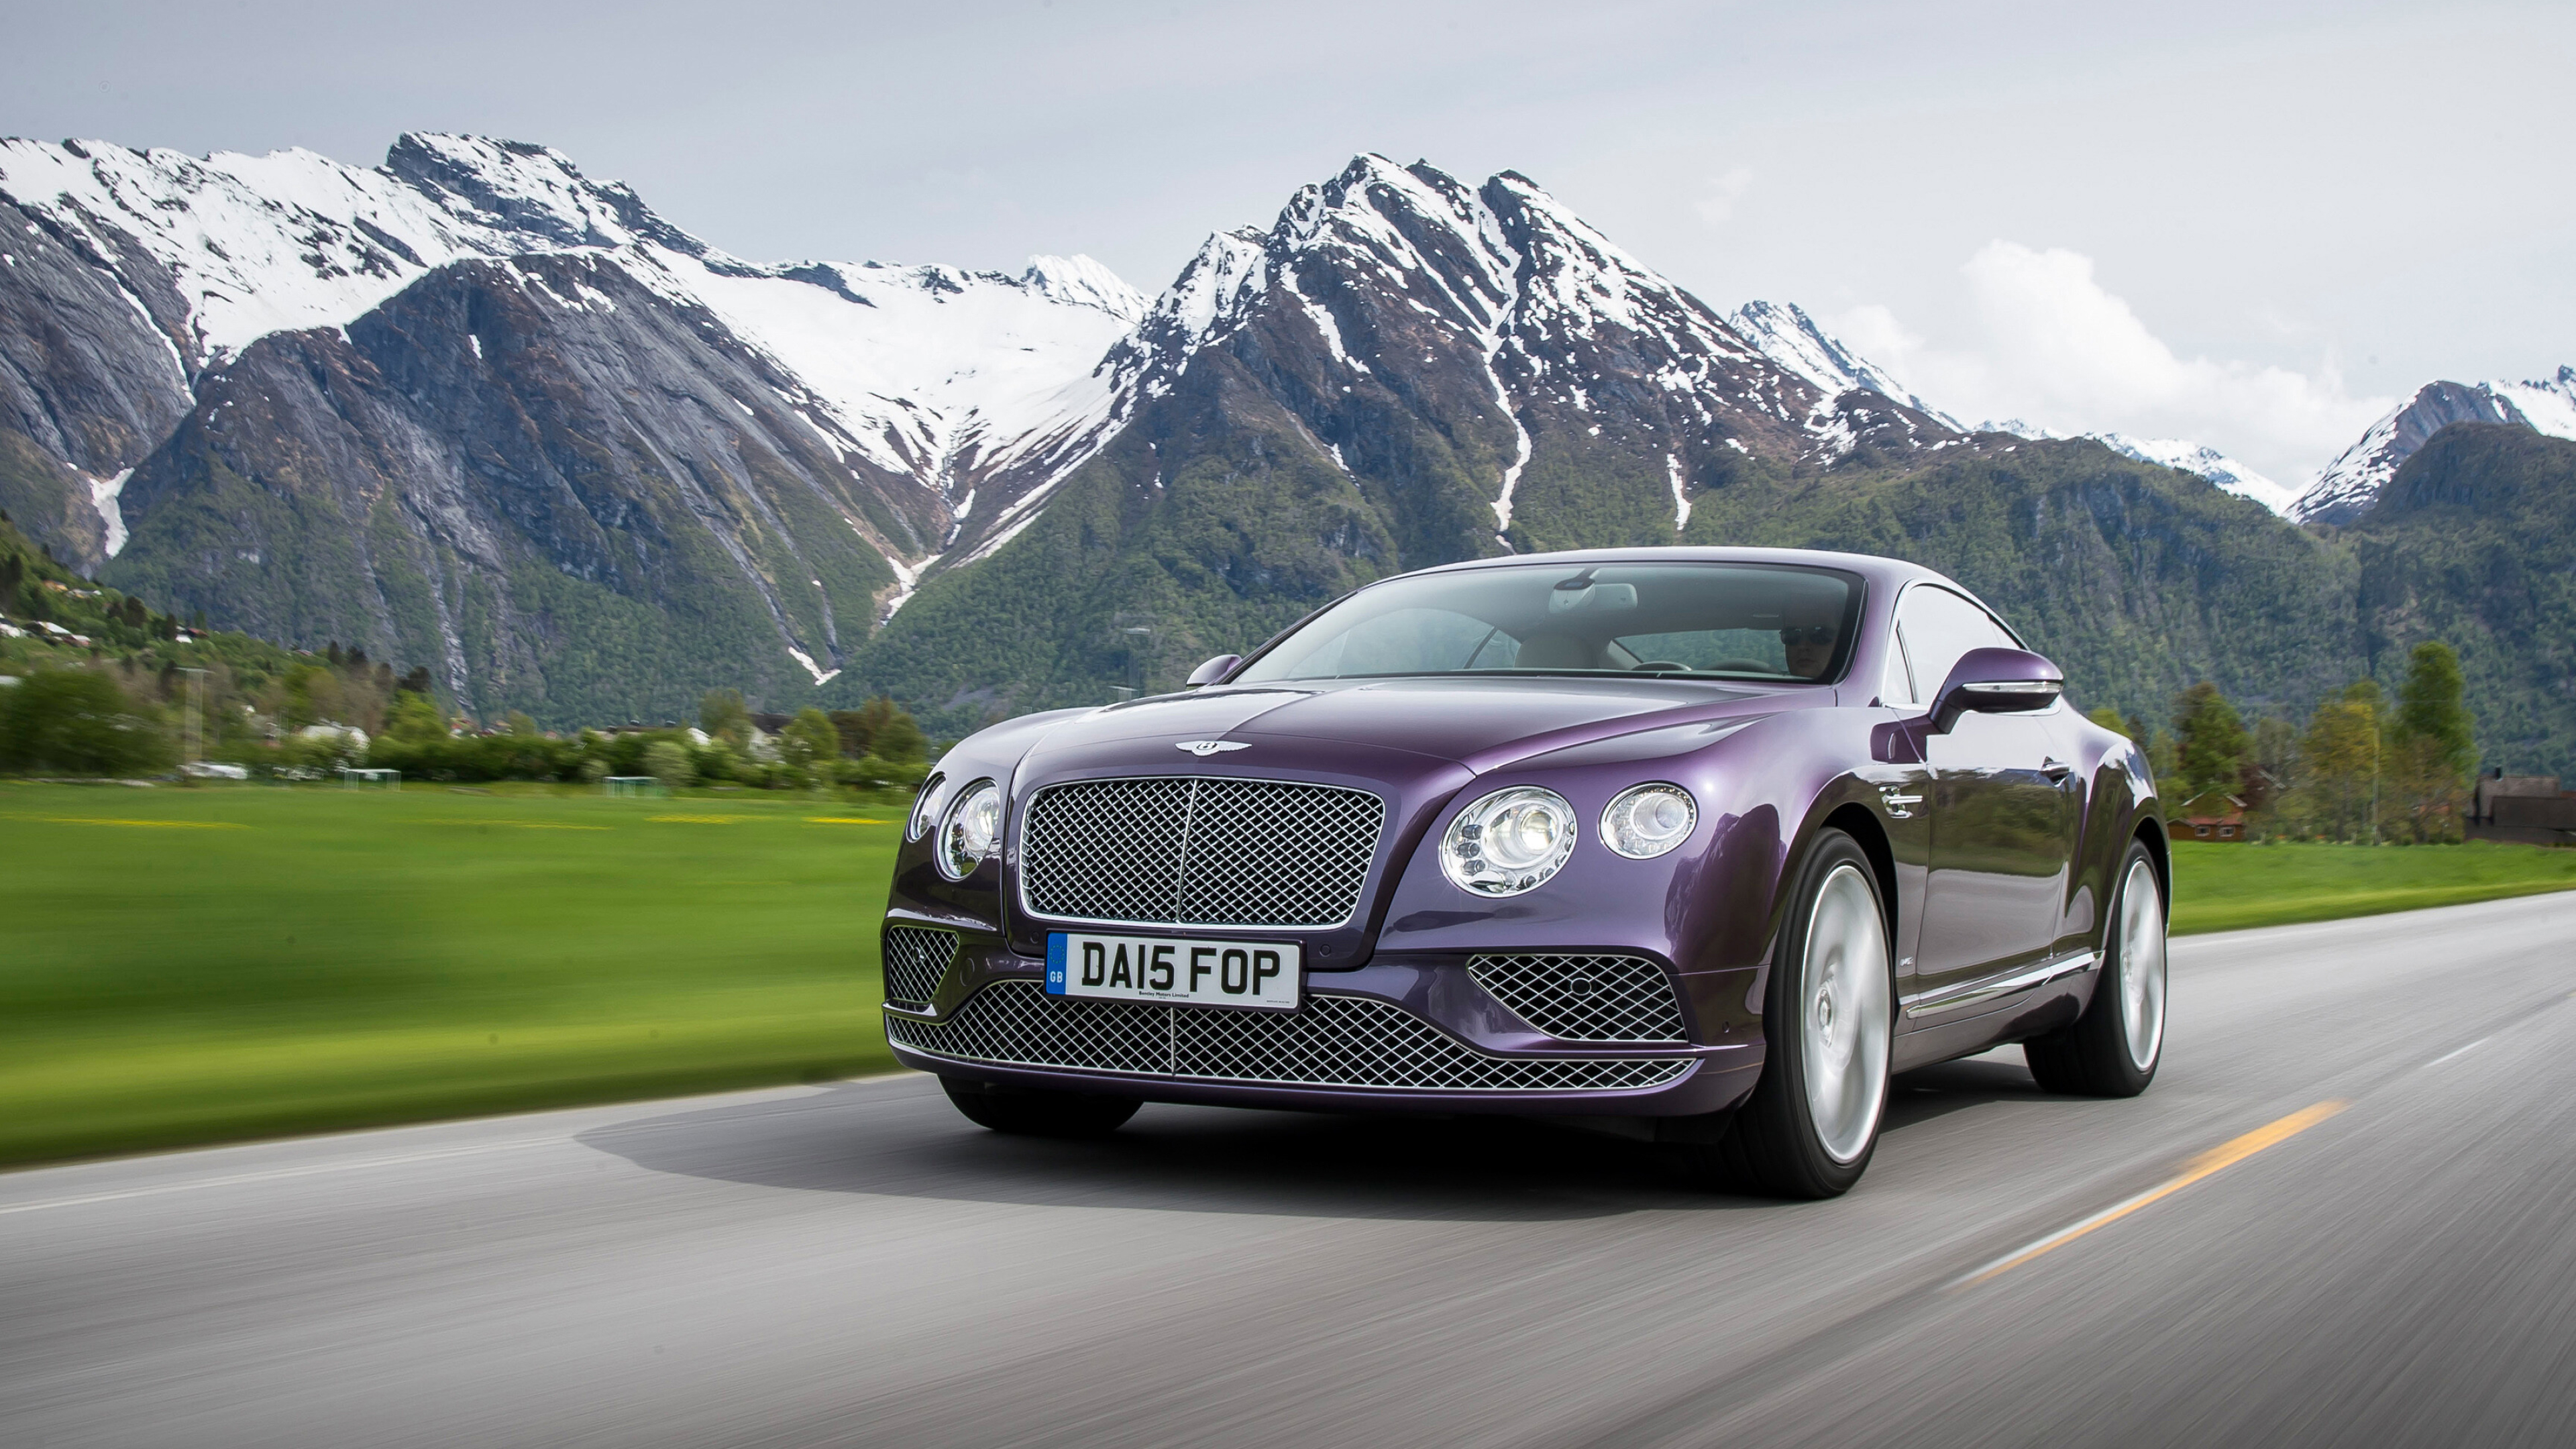 Bentley: The vehicle debuted in 2002 at the Paris Motor Show, followed by Le Mans, and the 2003 Goodwood Festival of Speed. 3840x2160 4K Wallpaper.